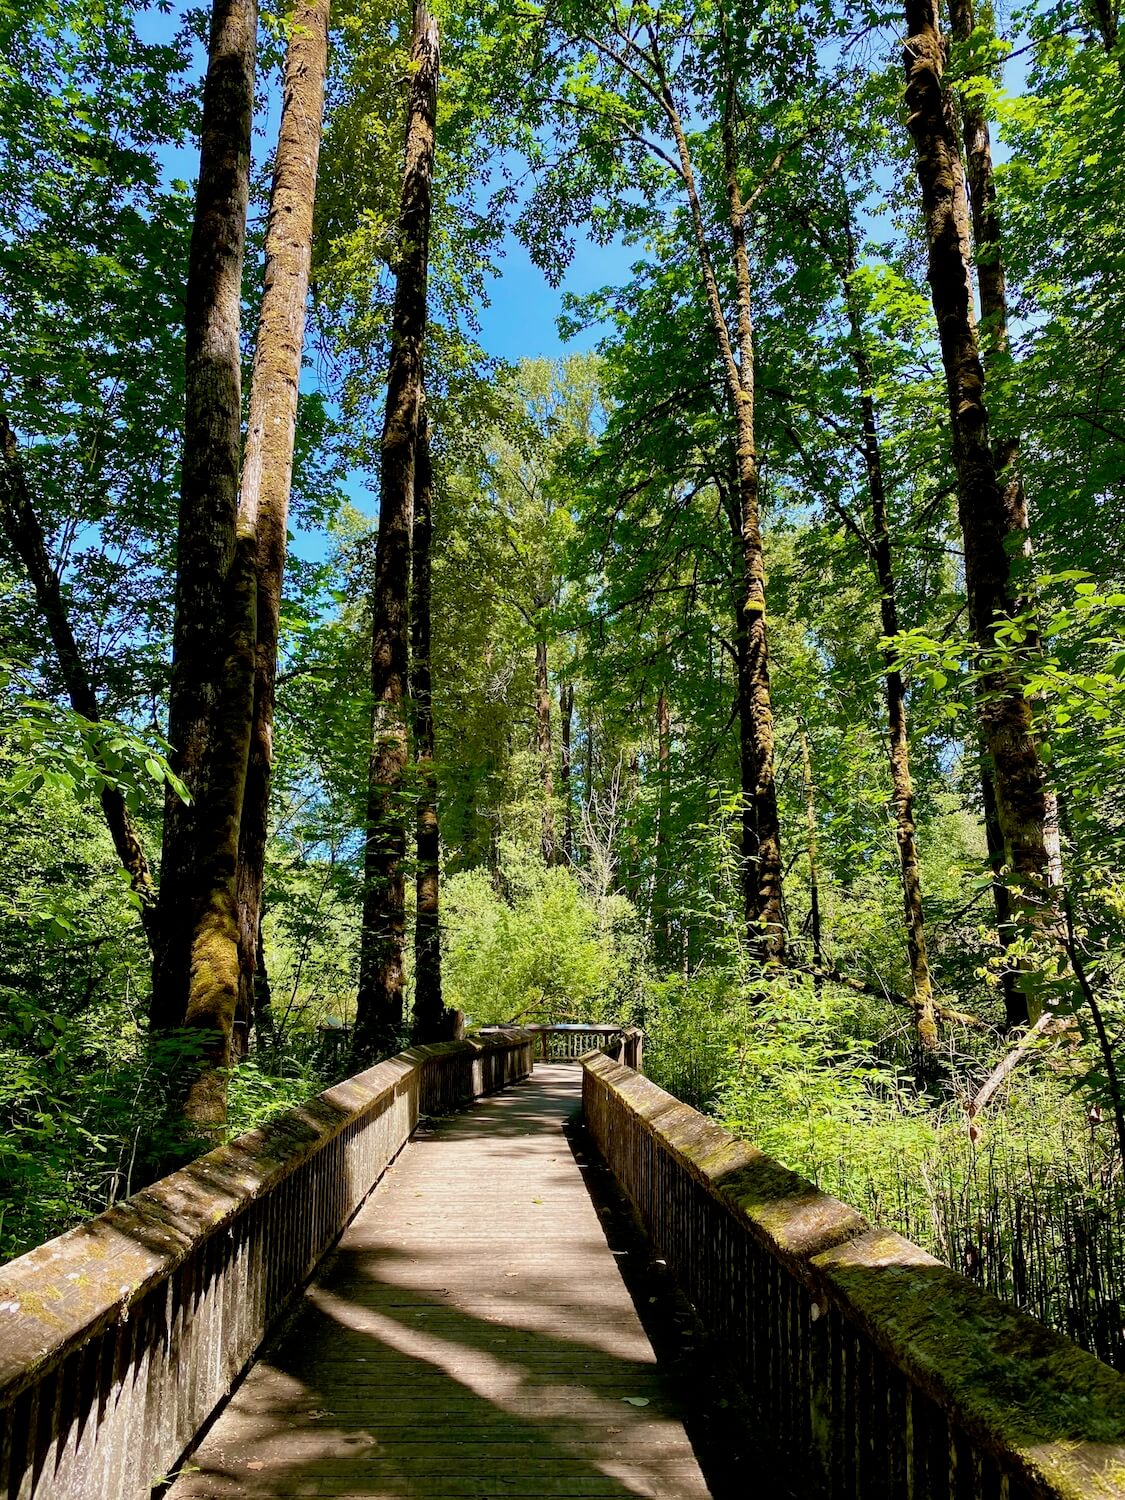 The boardwalk at Nisqually Wildlife Refuge winds through tall maple trees with blue sky peeking through the thick canopy of tree tops.